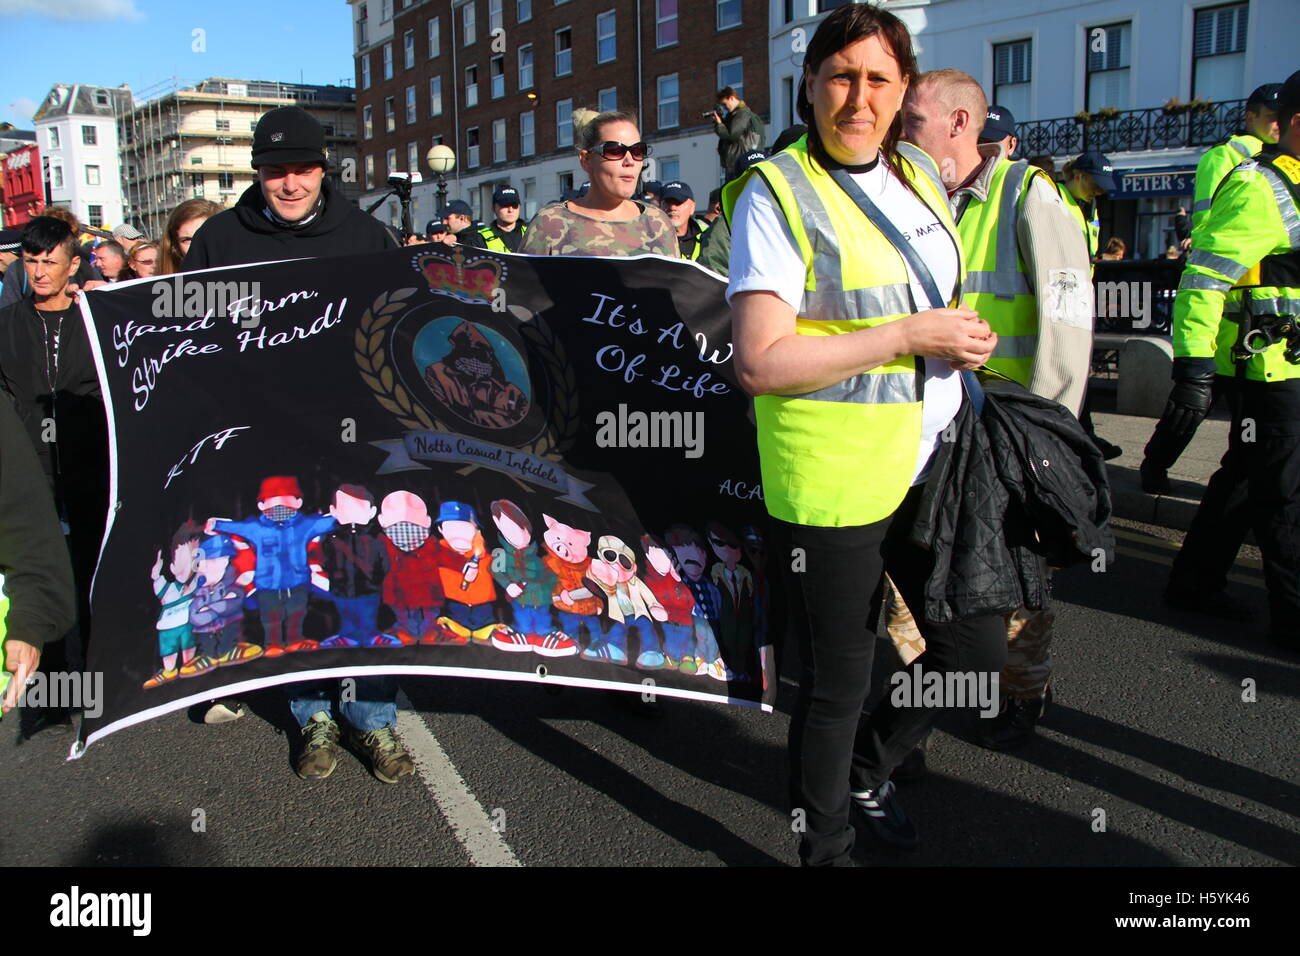 Margate, Kent, UK. 22nd October, 2016. Notts Casual Infidels with their banner. The right wing group White Lives Matter (WLM) march in the town. This is the first WLM demonstration in the UK. A counter demonstration, Margate Rocks Against Racism (MRAR) is taking place in the town at the same time. Penelope Barritt/Alamy Live News Stock Photo